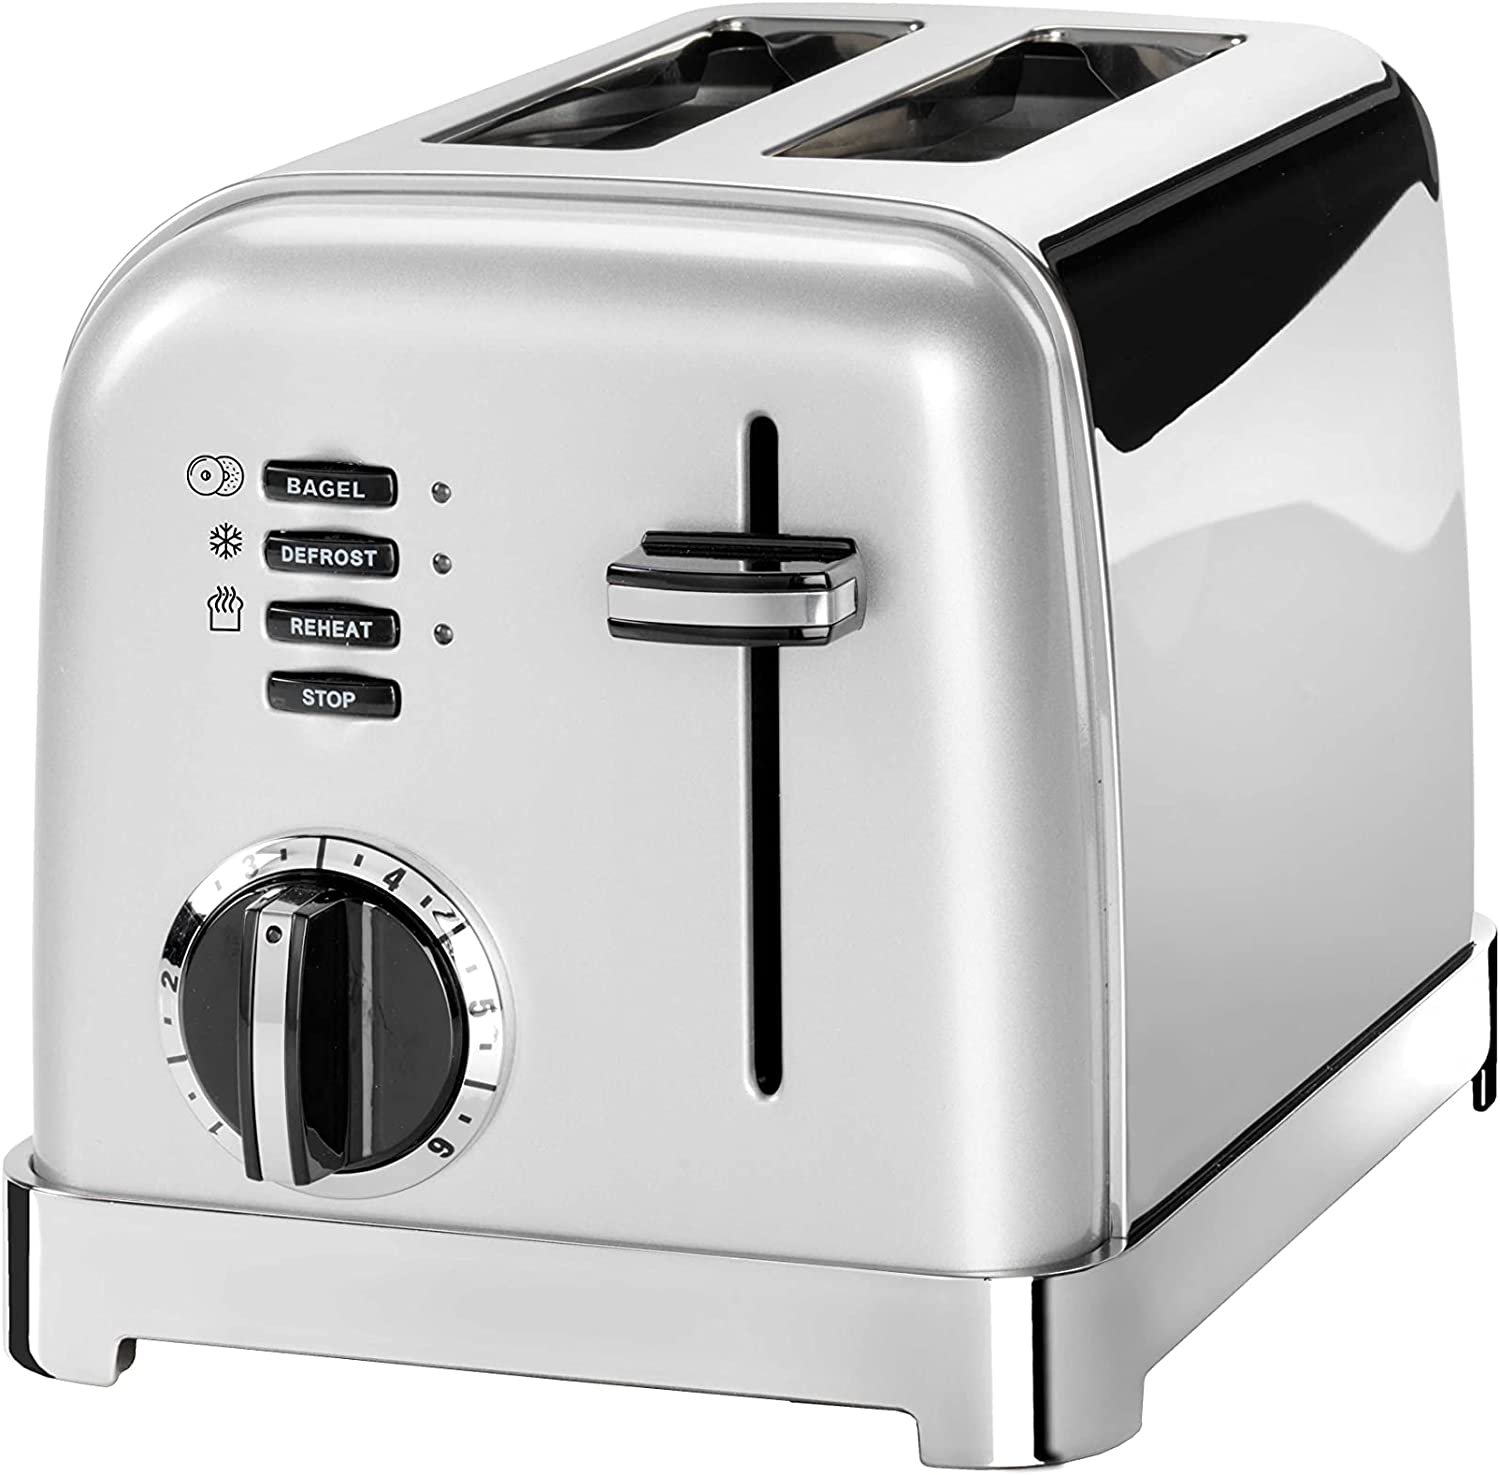 Cuisinart 2-slot toaster with 6 browning levels and defrosting, warm-up and stop function, extra wide toast slots, retro design, silver, CPT160SE